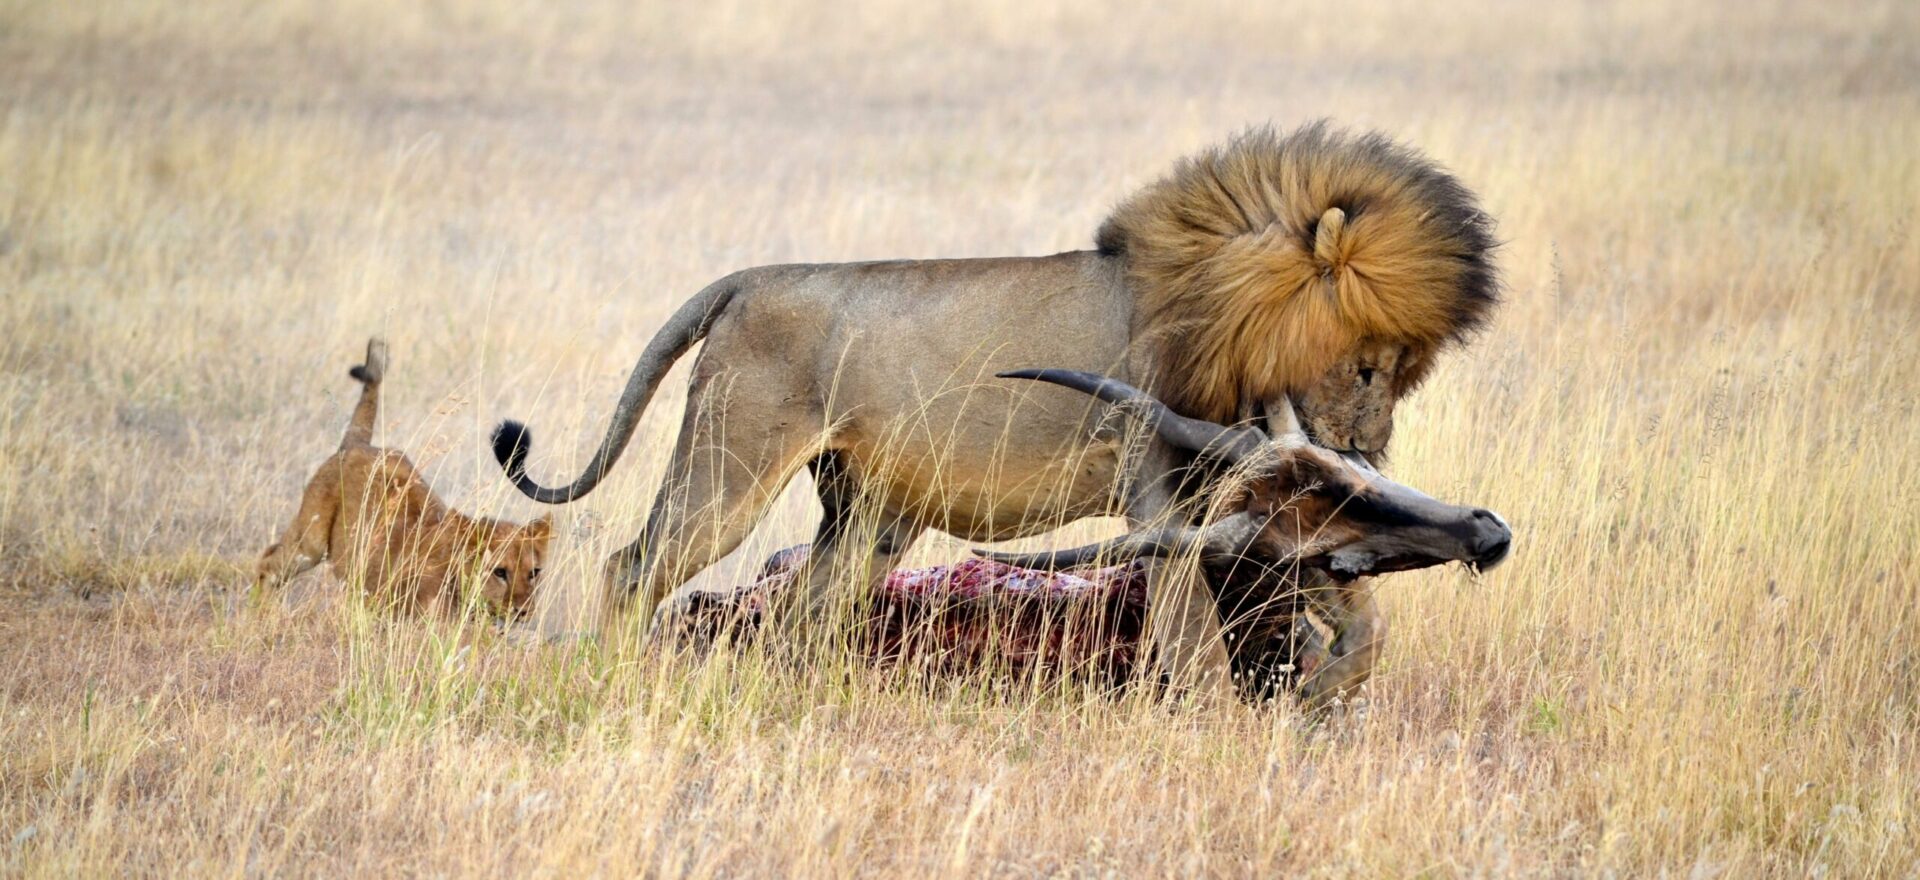 lion with a topi kill in the open plains. a cub is trailing viewed on safari in tanzania